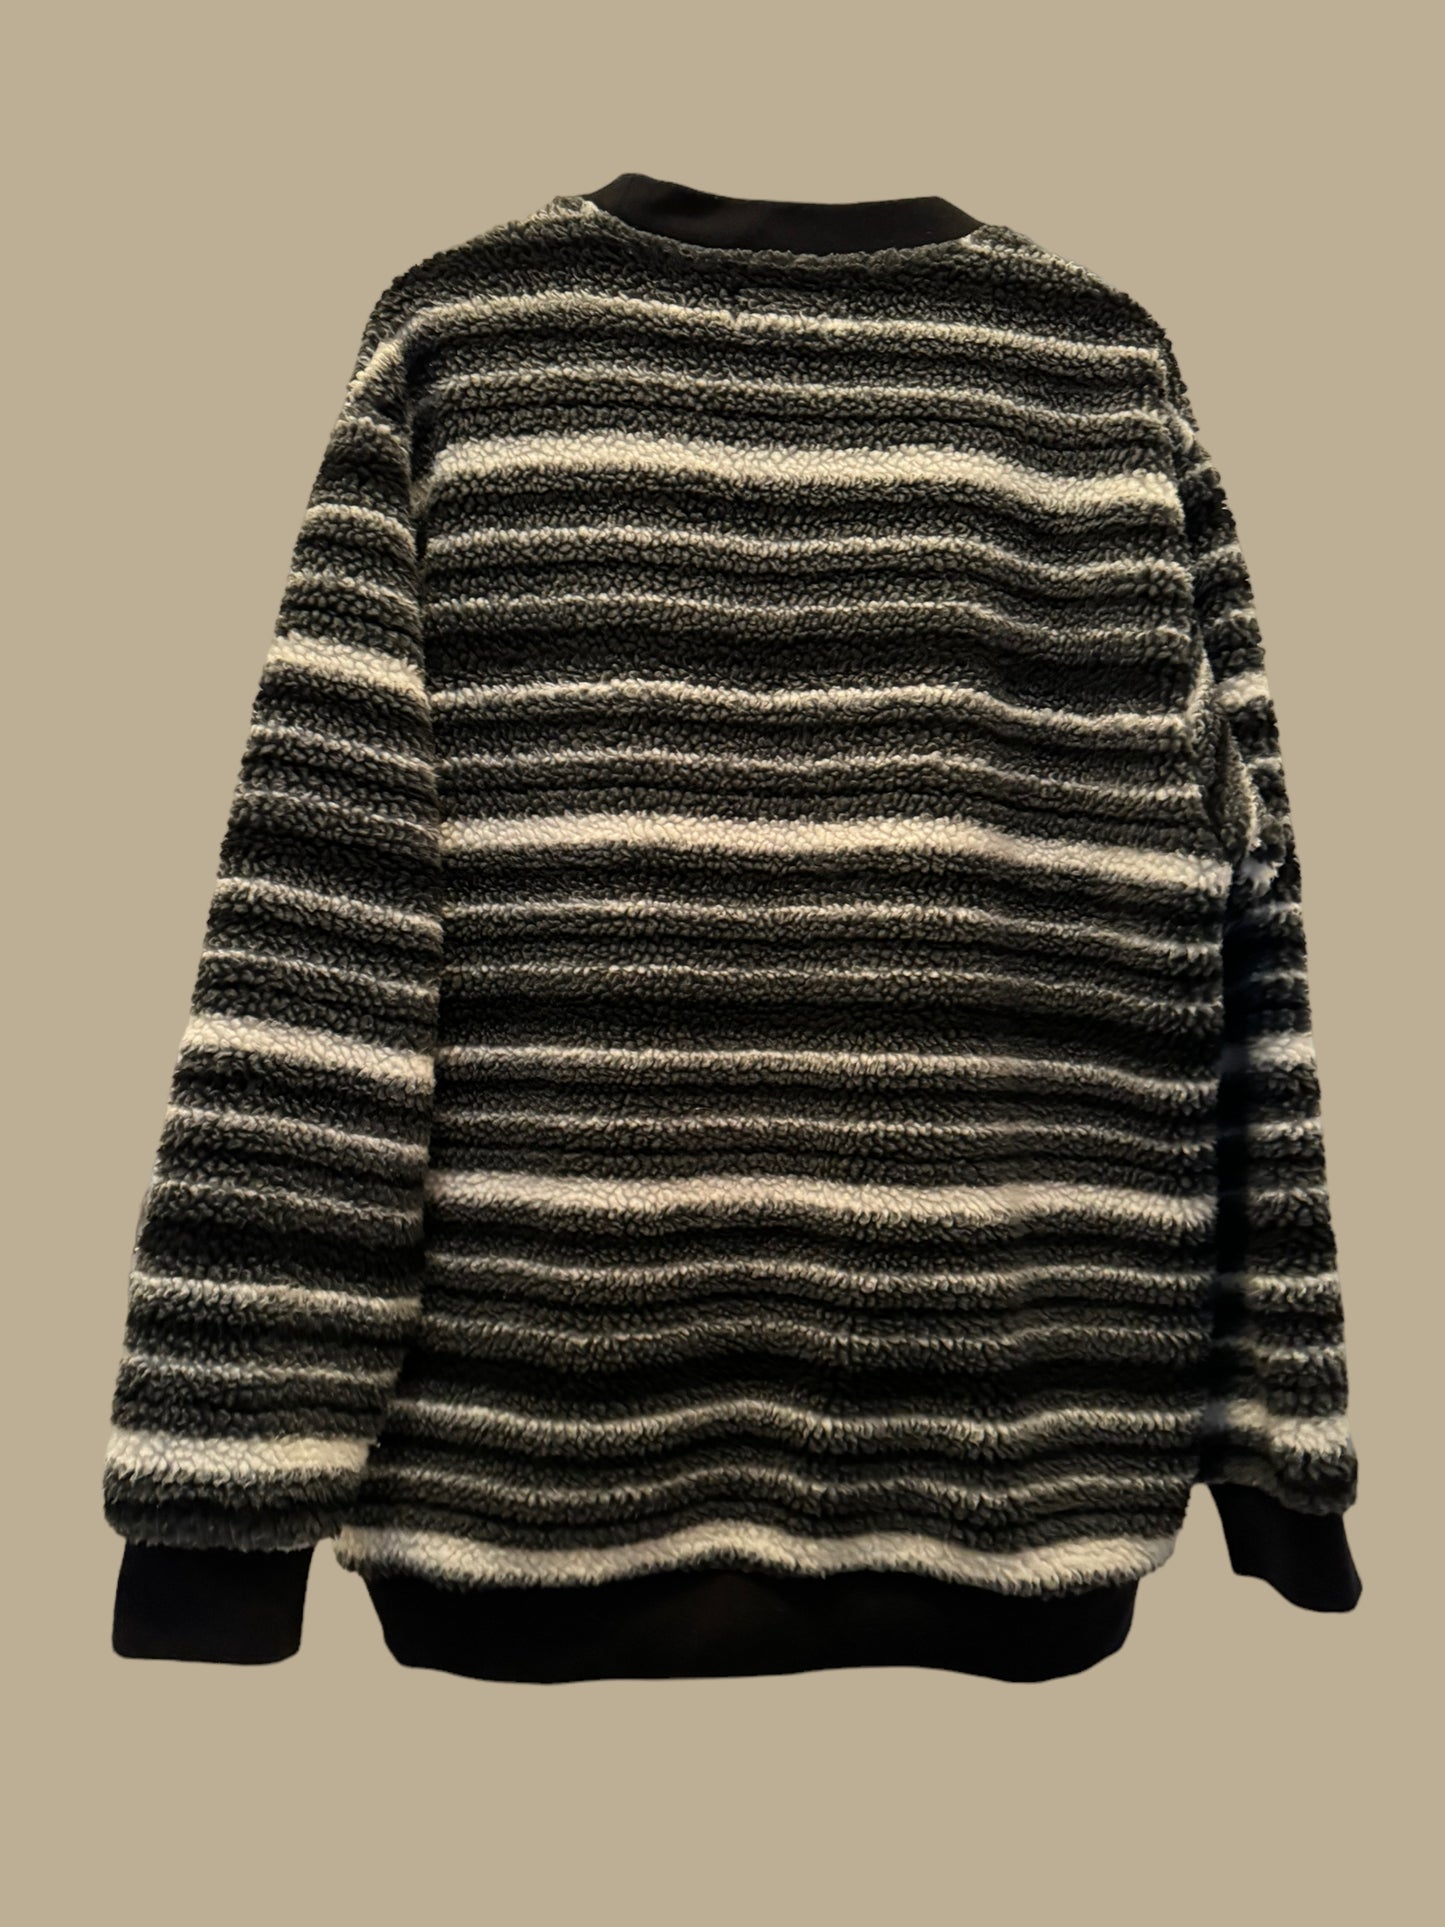 mens BEAMS+ fluffy sweater size xl